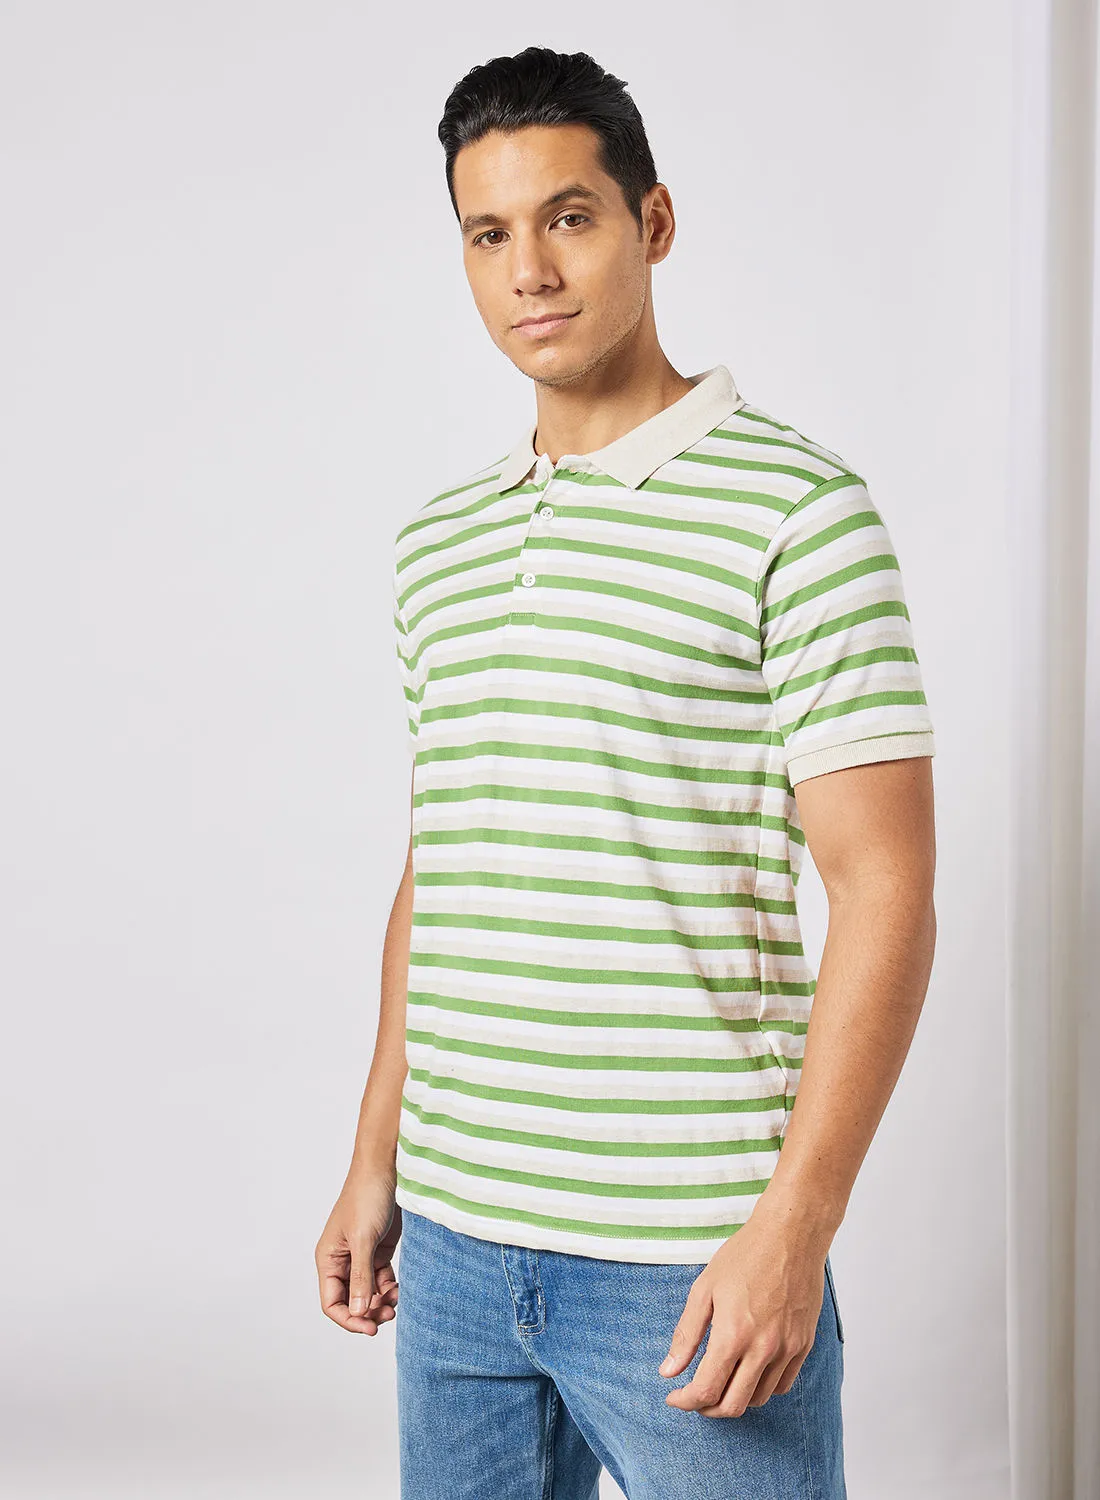 Noon East Men's Basic Casual Polo T-Shirt with Stripe Design in Regular Fit Half Sleeves White